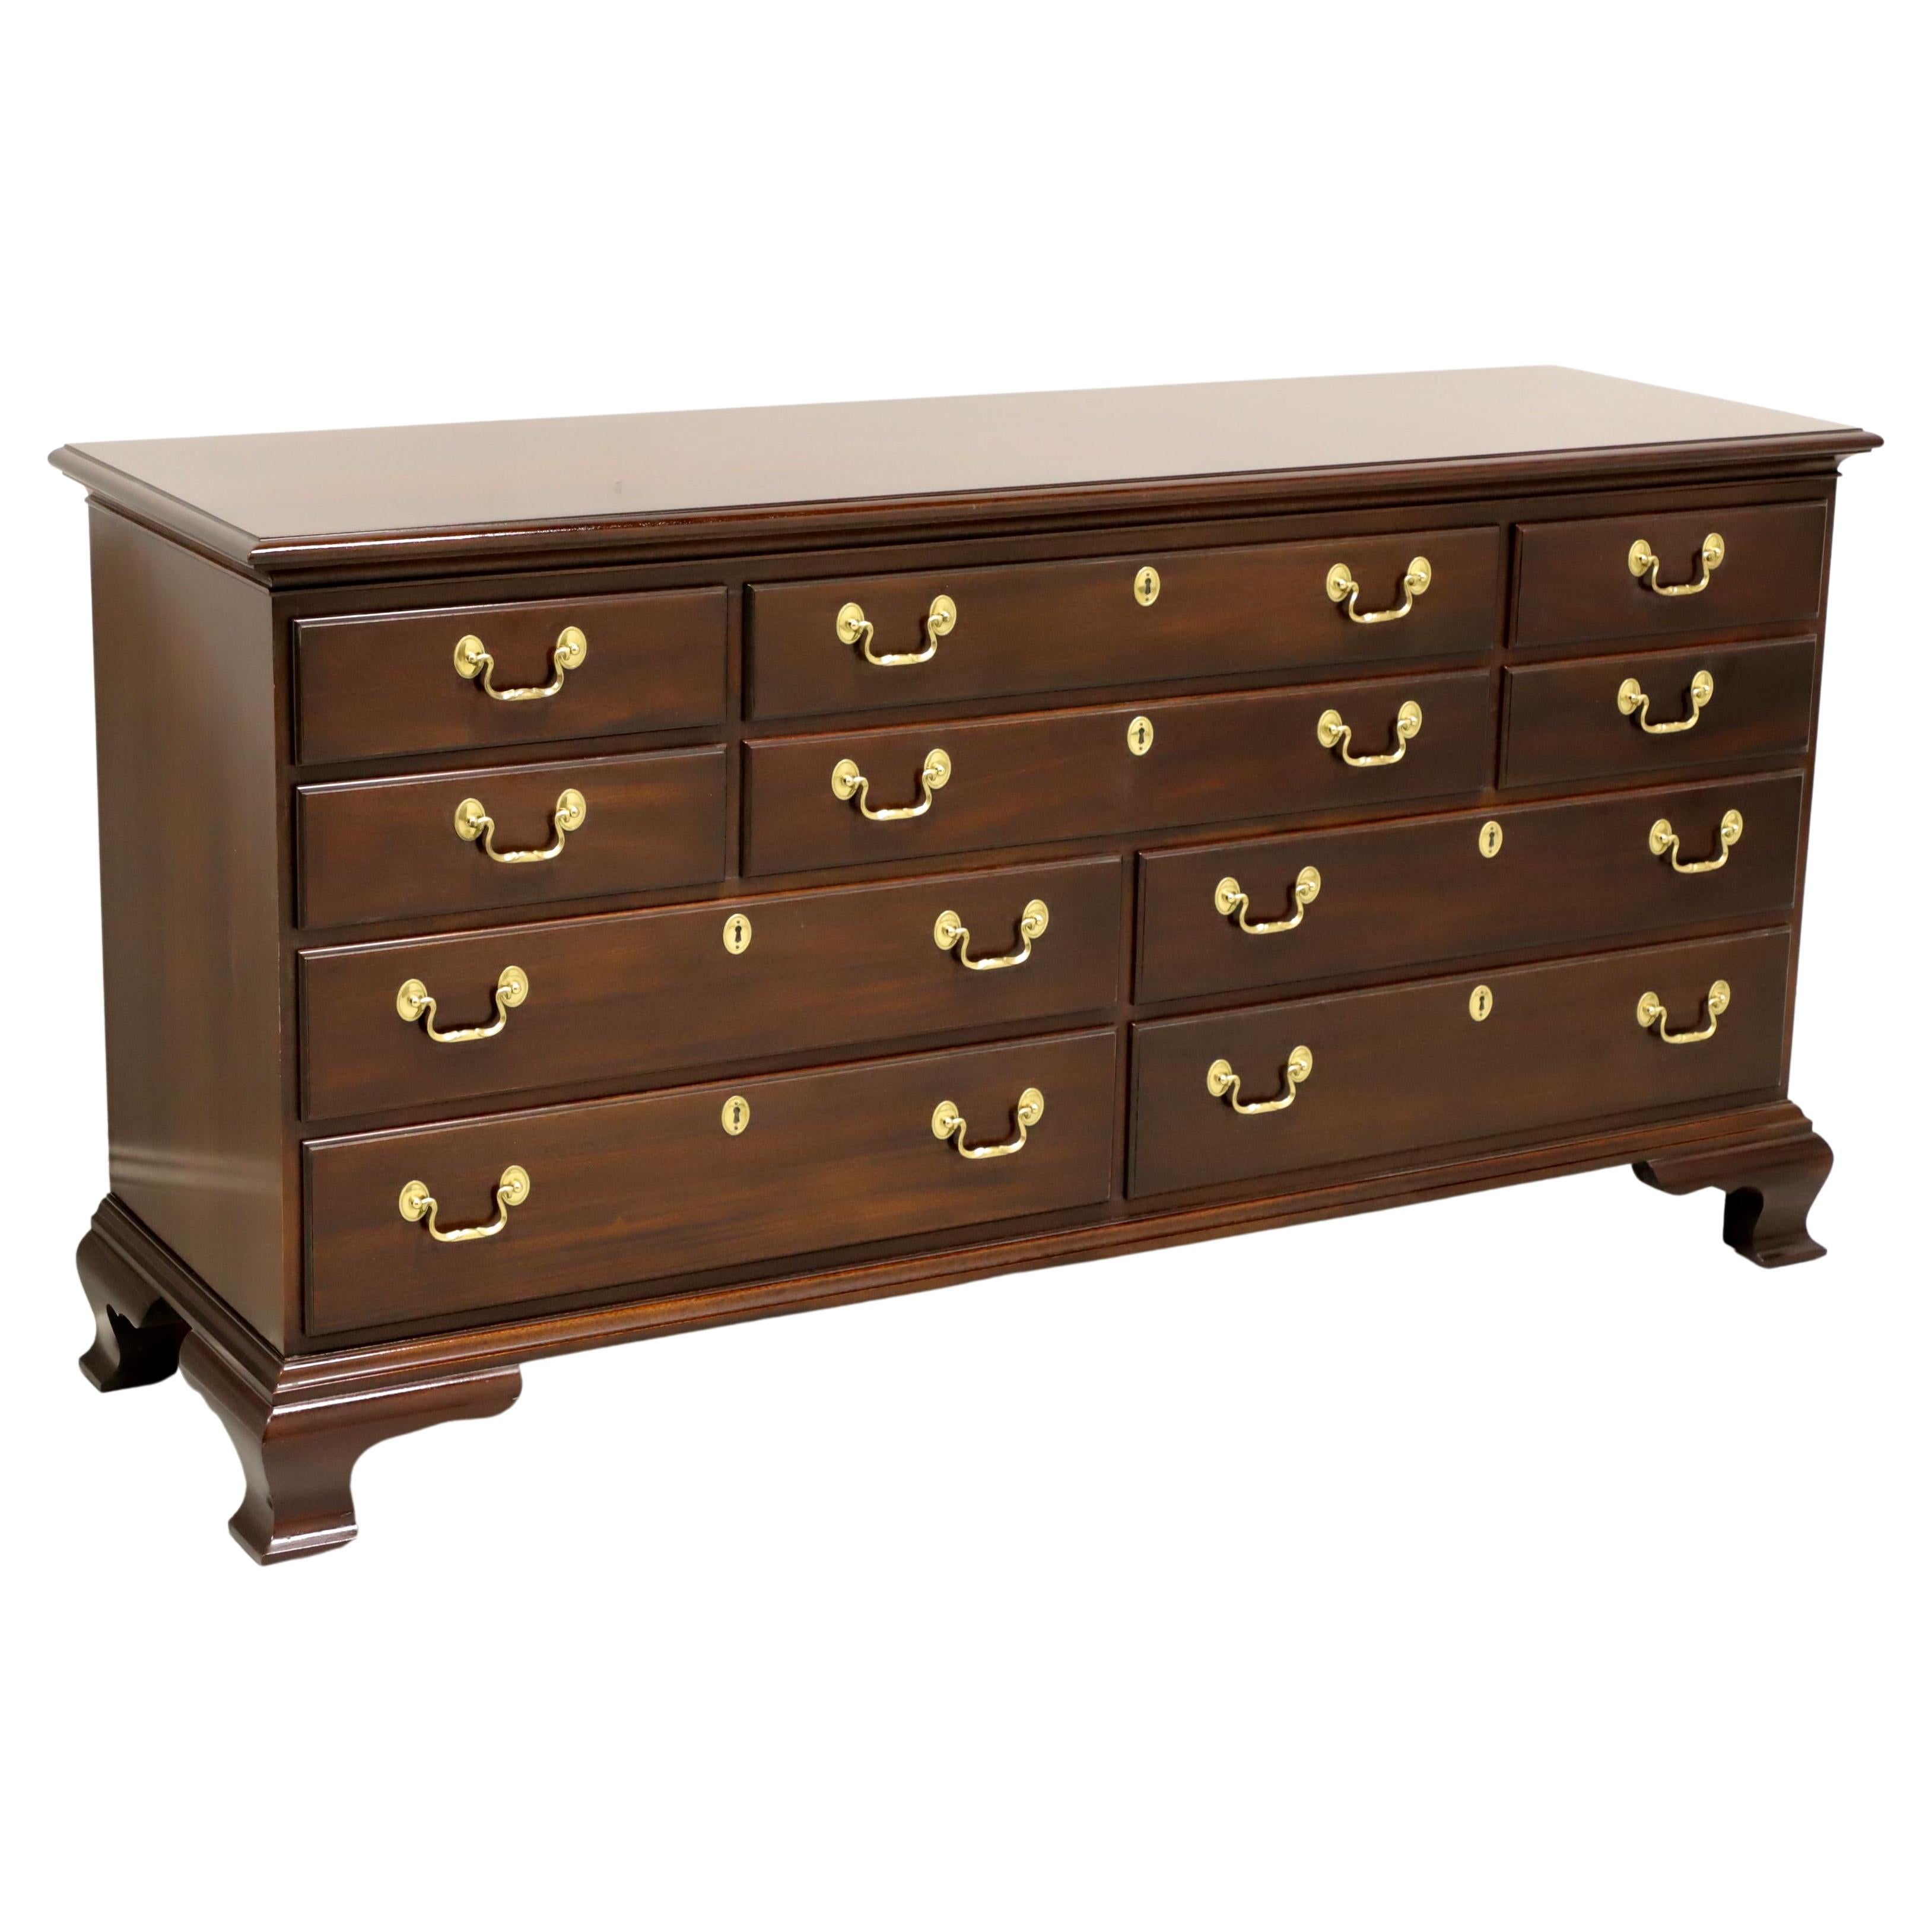 COUNCILL CRAFTSMEN Mahogany Chippendale Style Triple Dresser